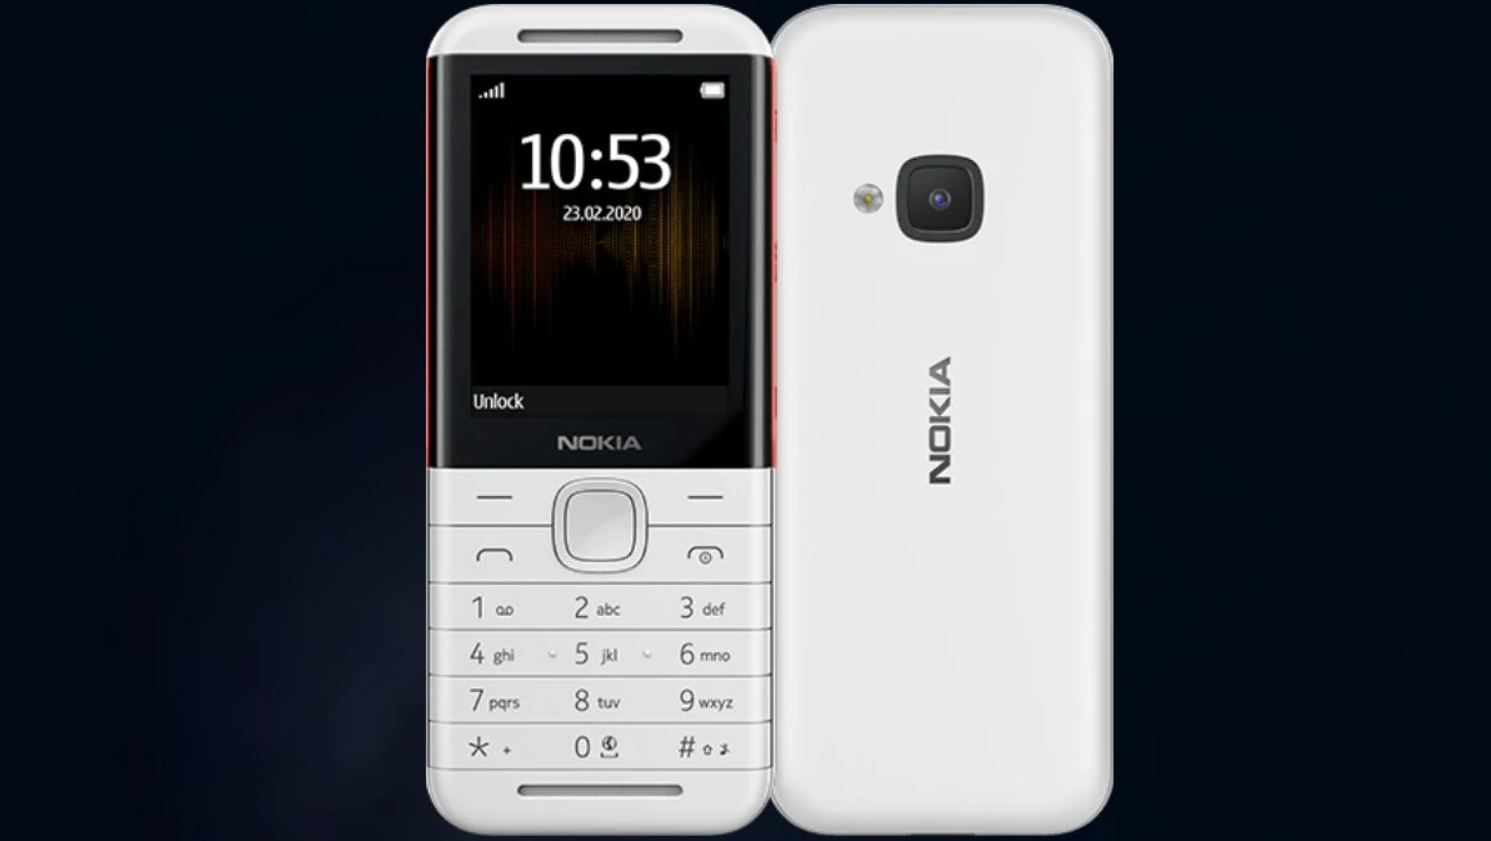 Nokia 5310 Characteristic Telephone will launch in India on June 16